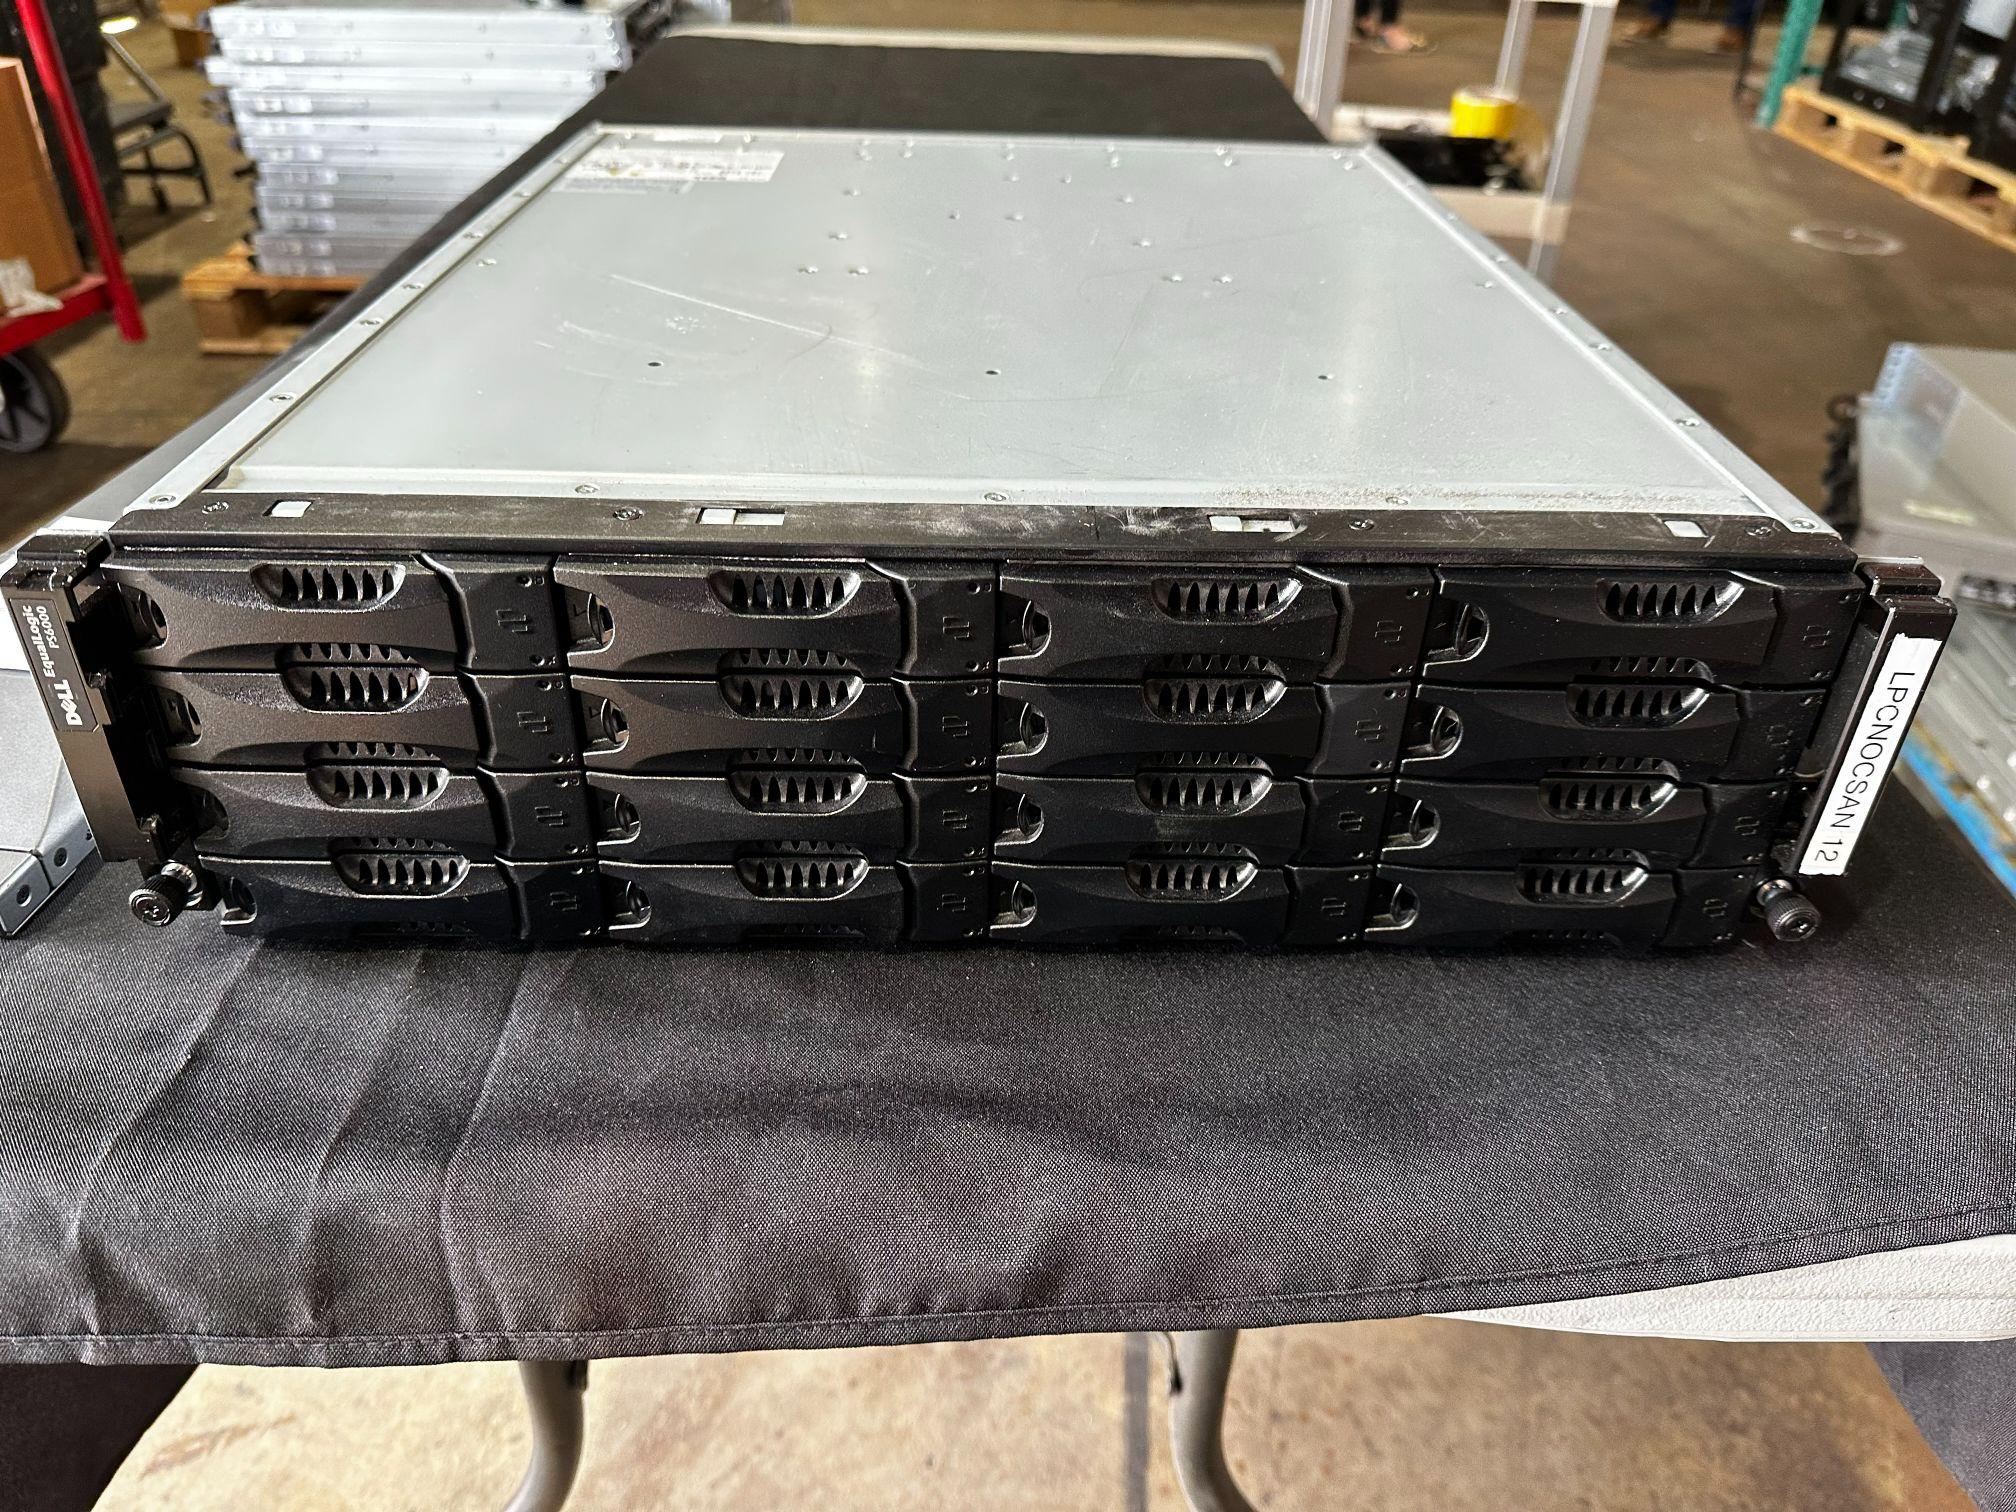 DELL EQUALLOGIC PS6000 STORAGE SYSTEM